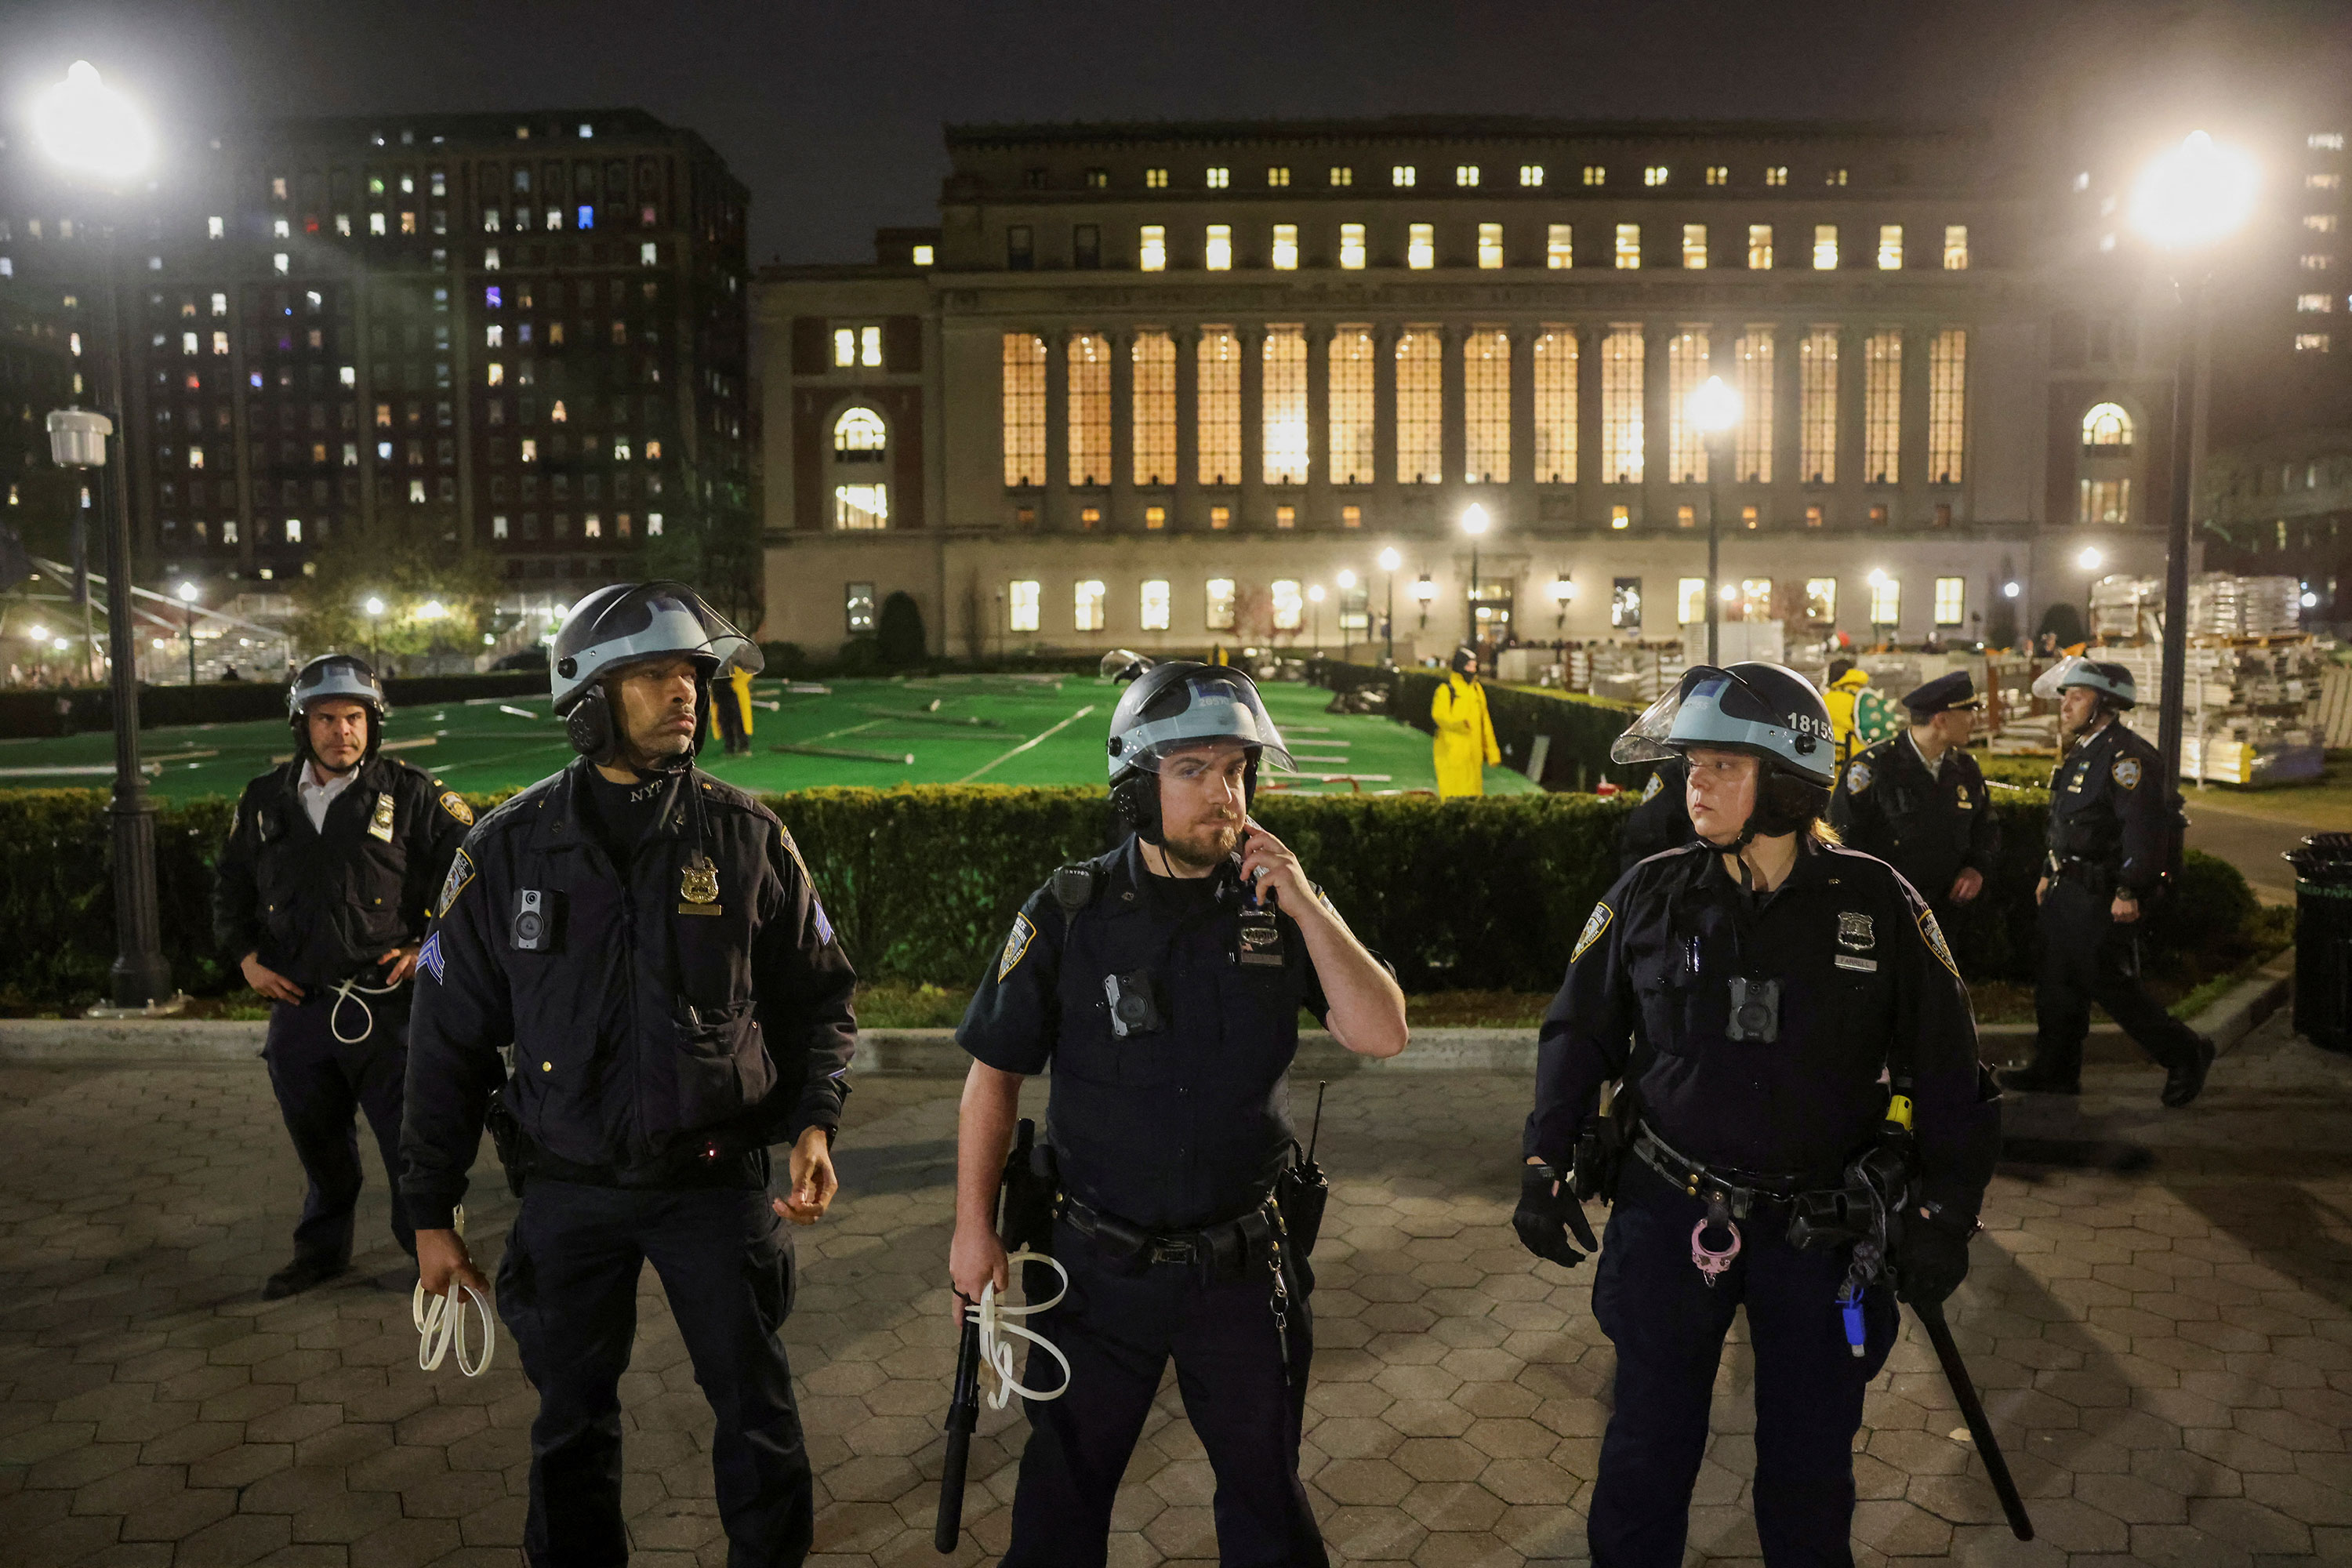 Police stand guard on campus at Columbia University.